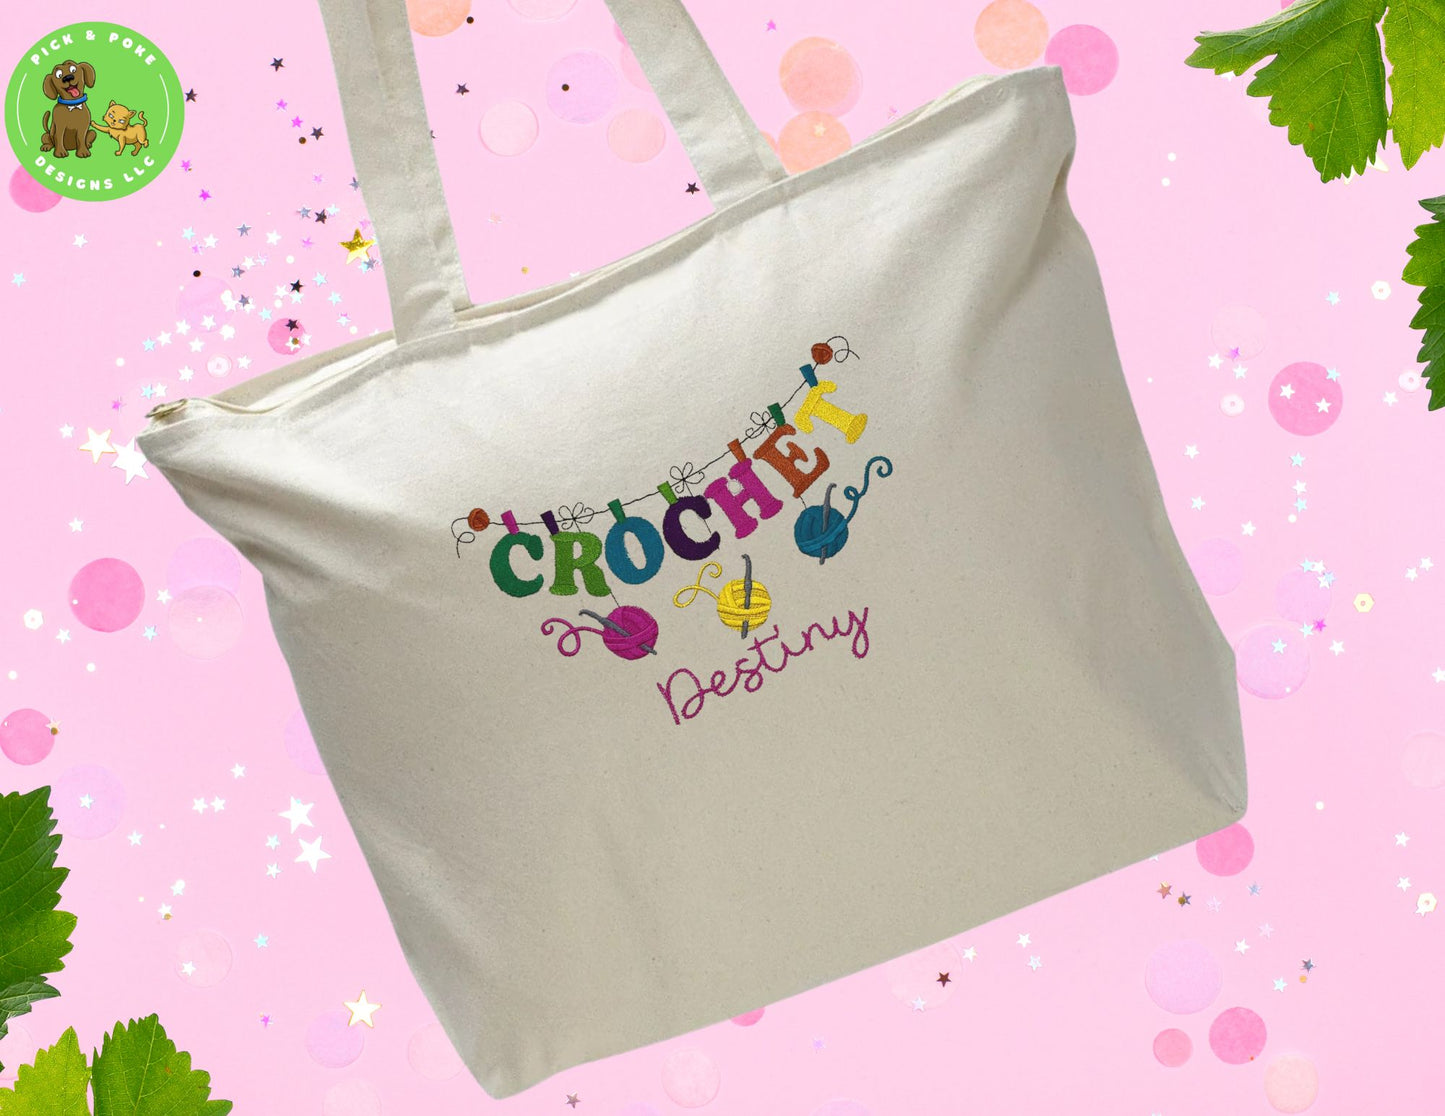 Embroidered Crochet Canvas Tote Bag with Personalized Name